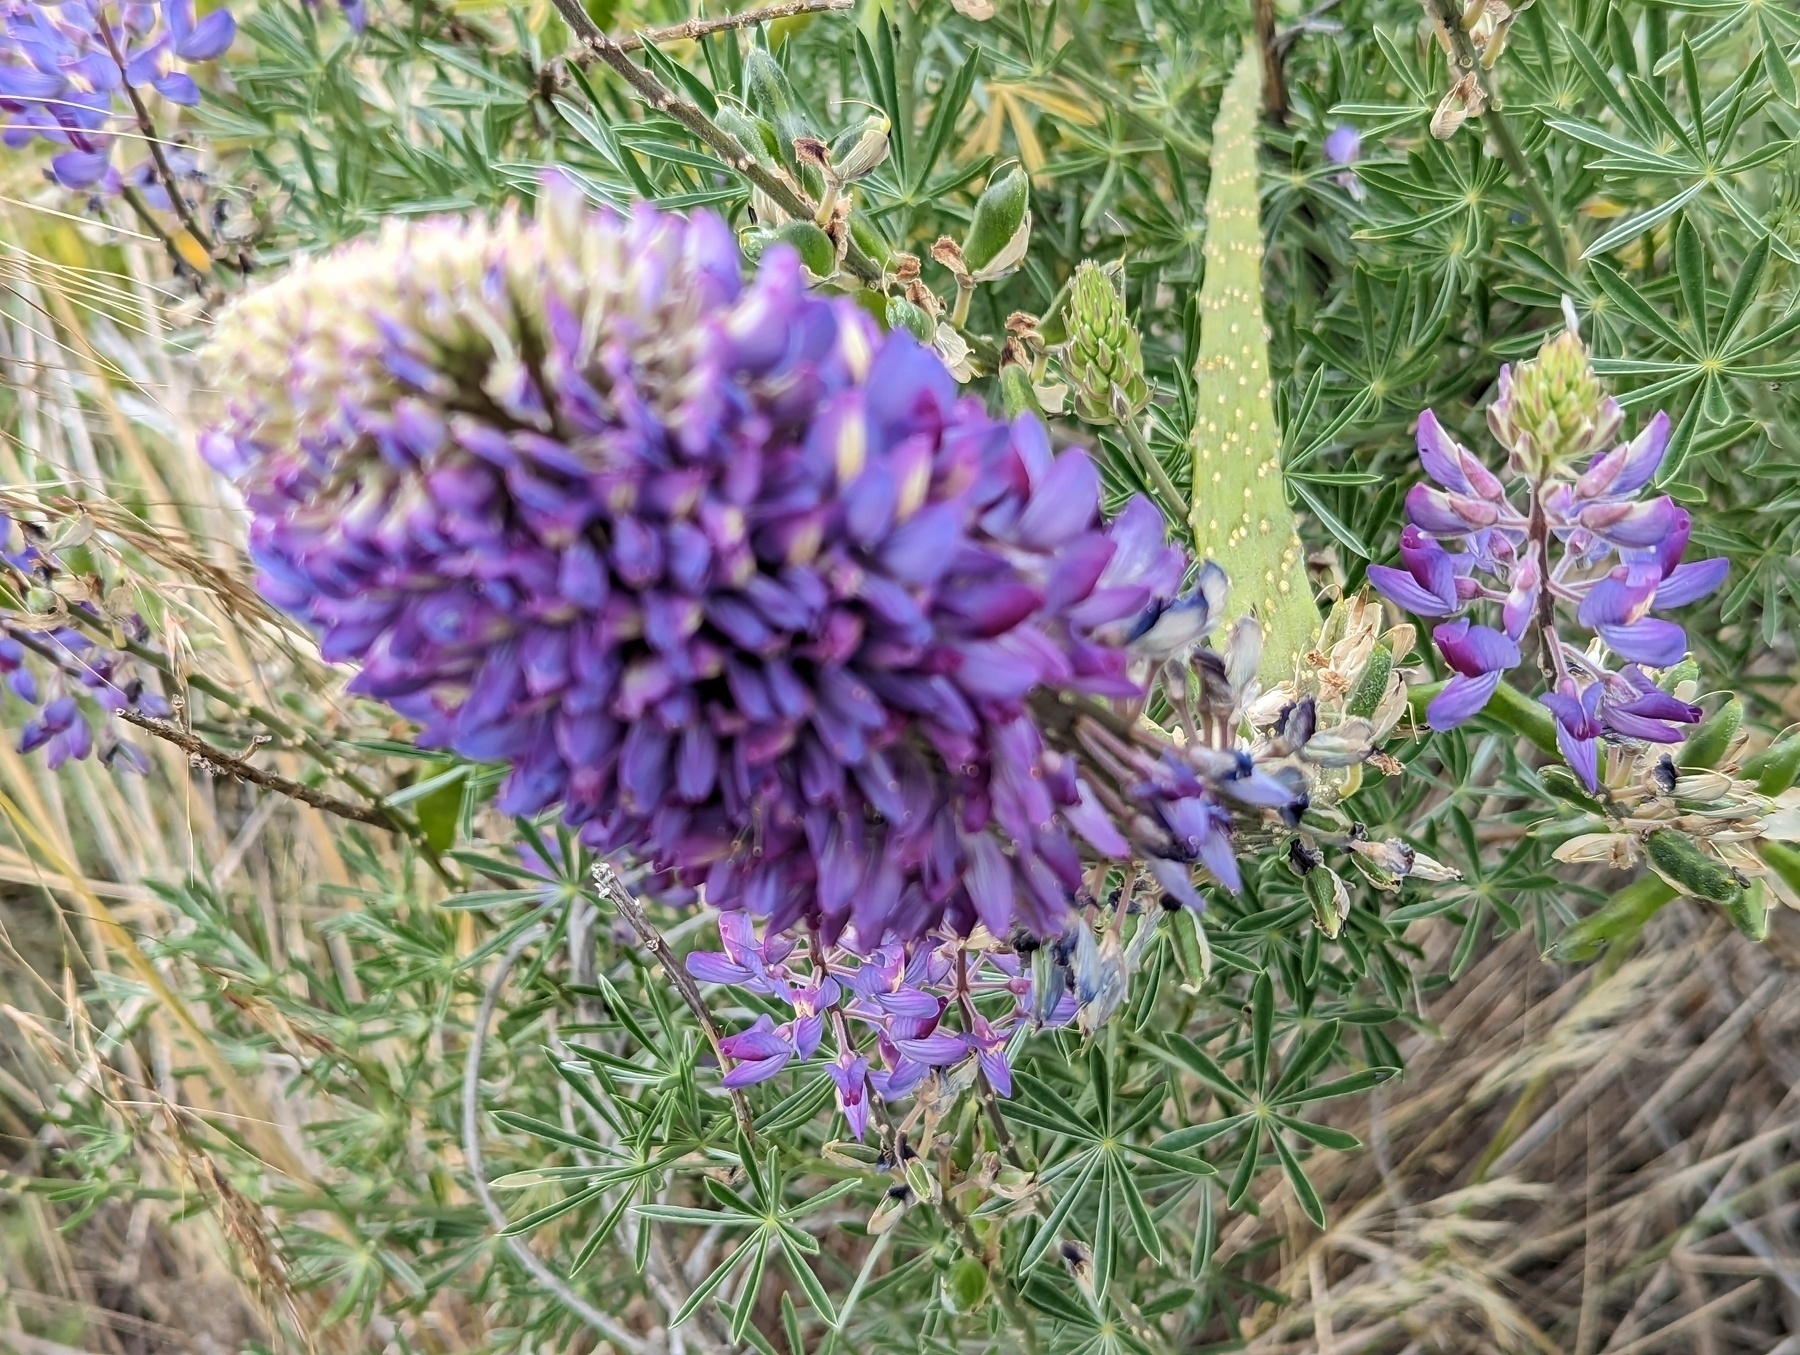 Green and brown foliage including a fast wide succulent tentacle looking leaf springs up from the ground behind an out of focus large purple flower bloom Monday, May 15, 2023 along the Wildcat Creek Greenway in San Pablo, California.